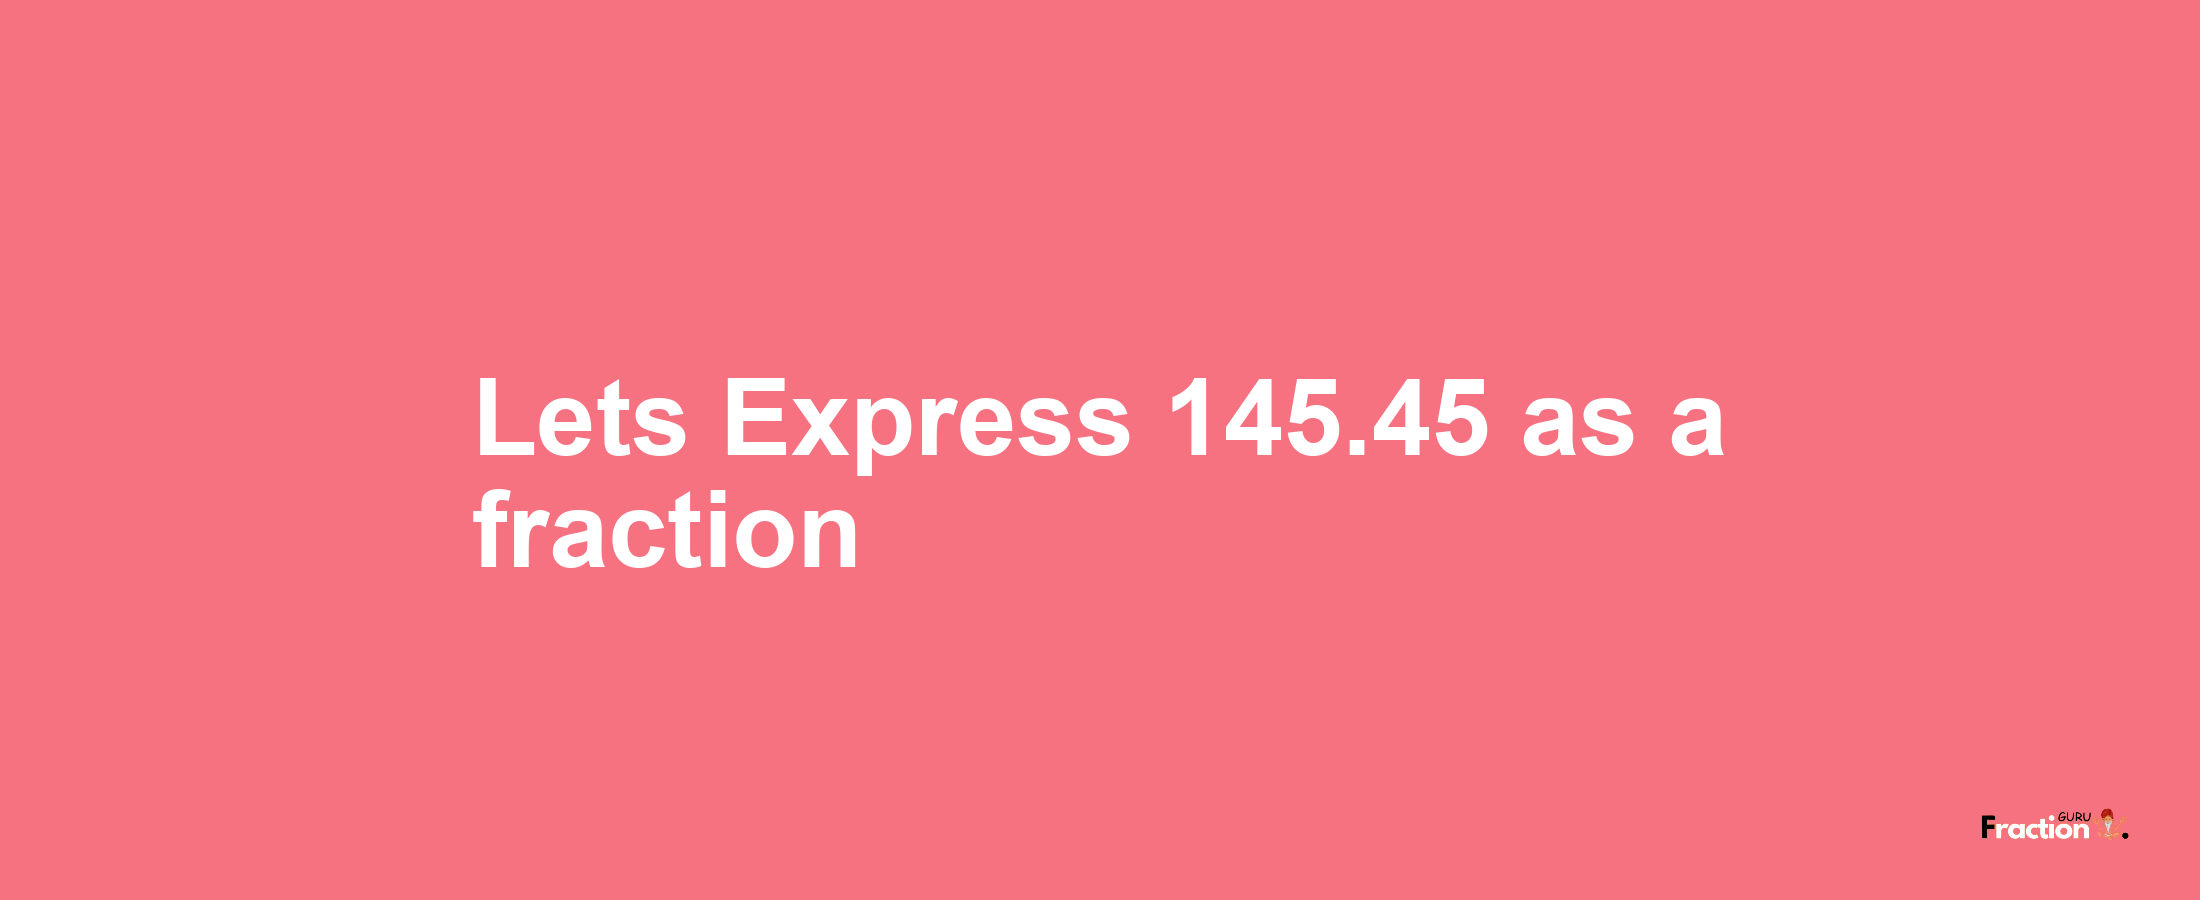 Lets Express 145.45 as afraction